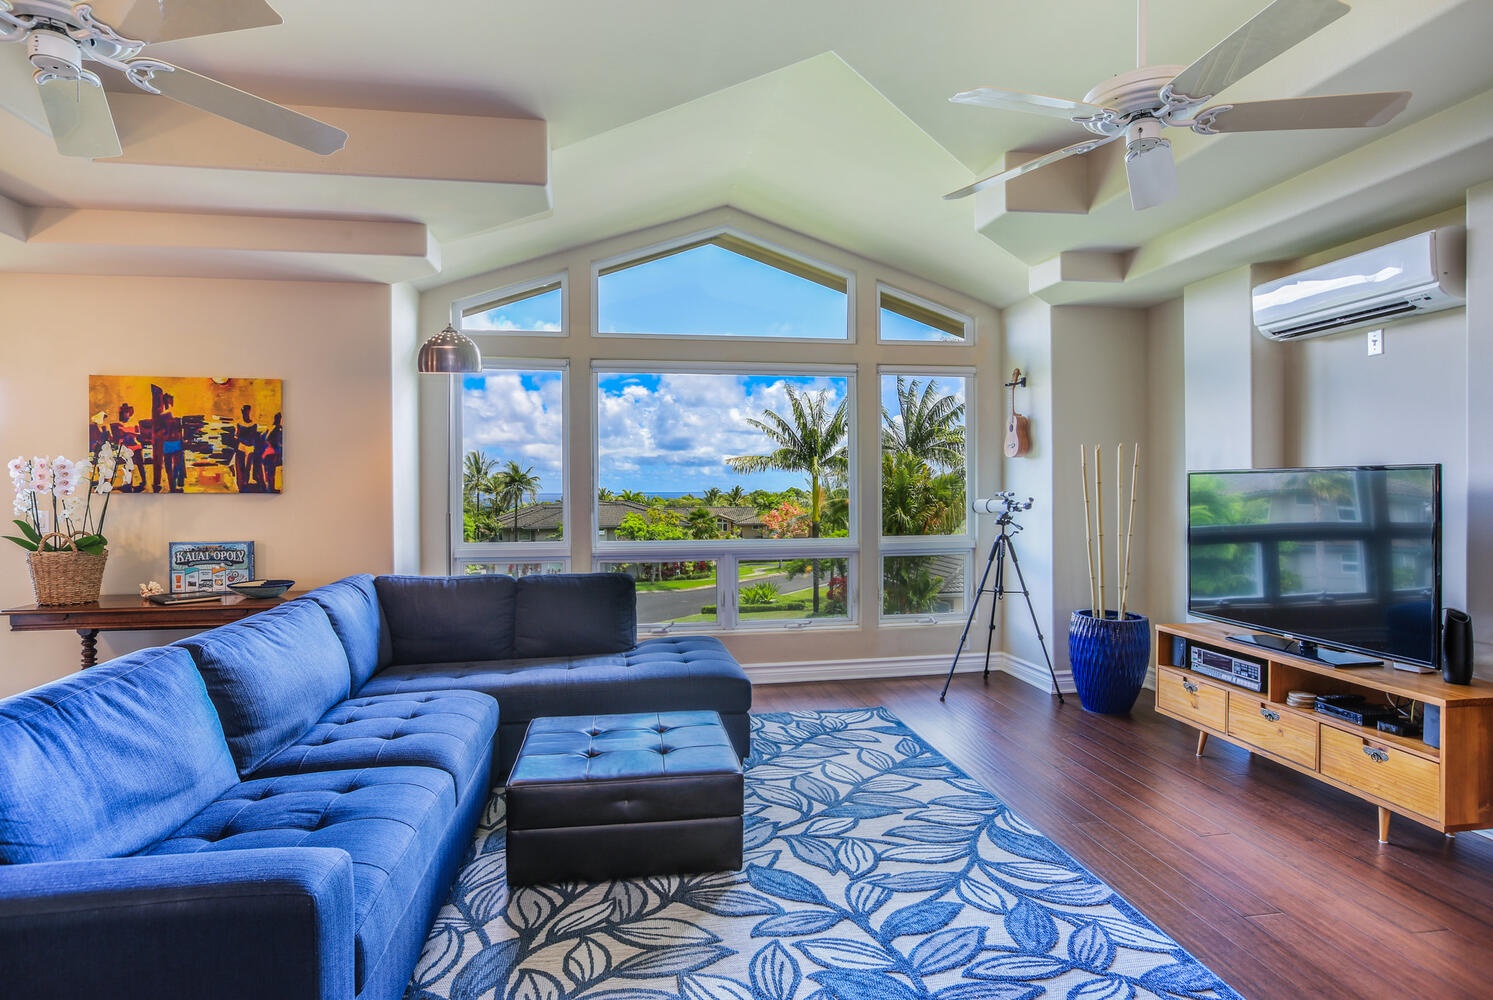 Princeville Vacation Rentals, Noelani Kai - Welcome to our elegant haven nestled in the heart of Princeville, Hawaii, where luxury meets tropical paradise.